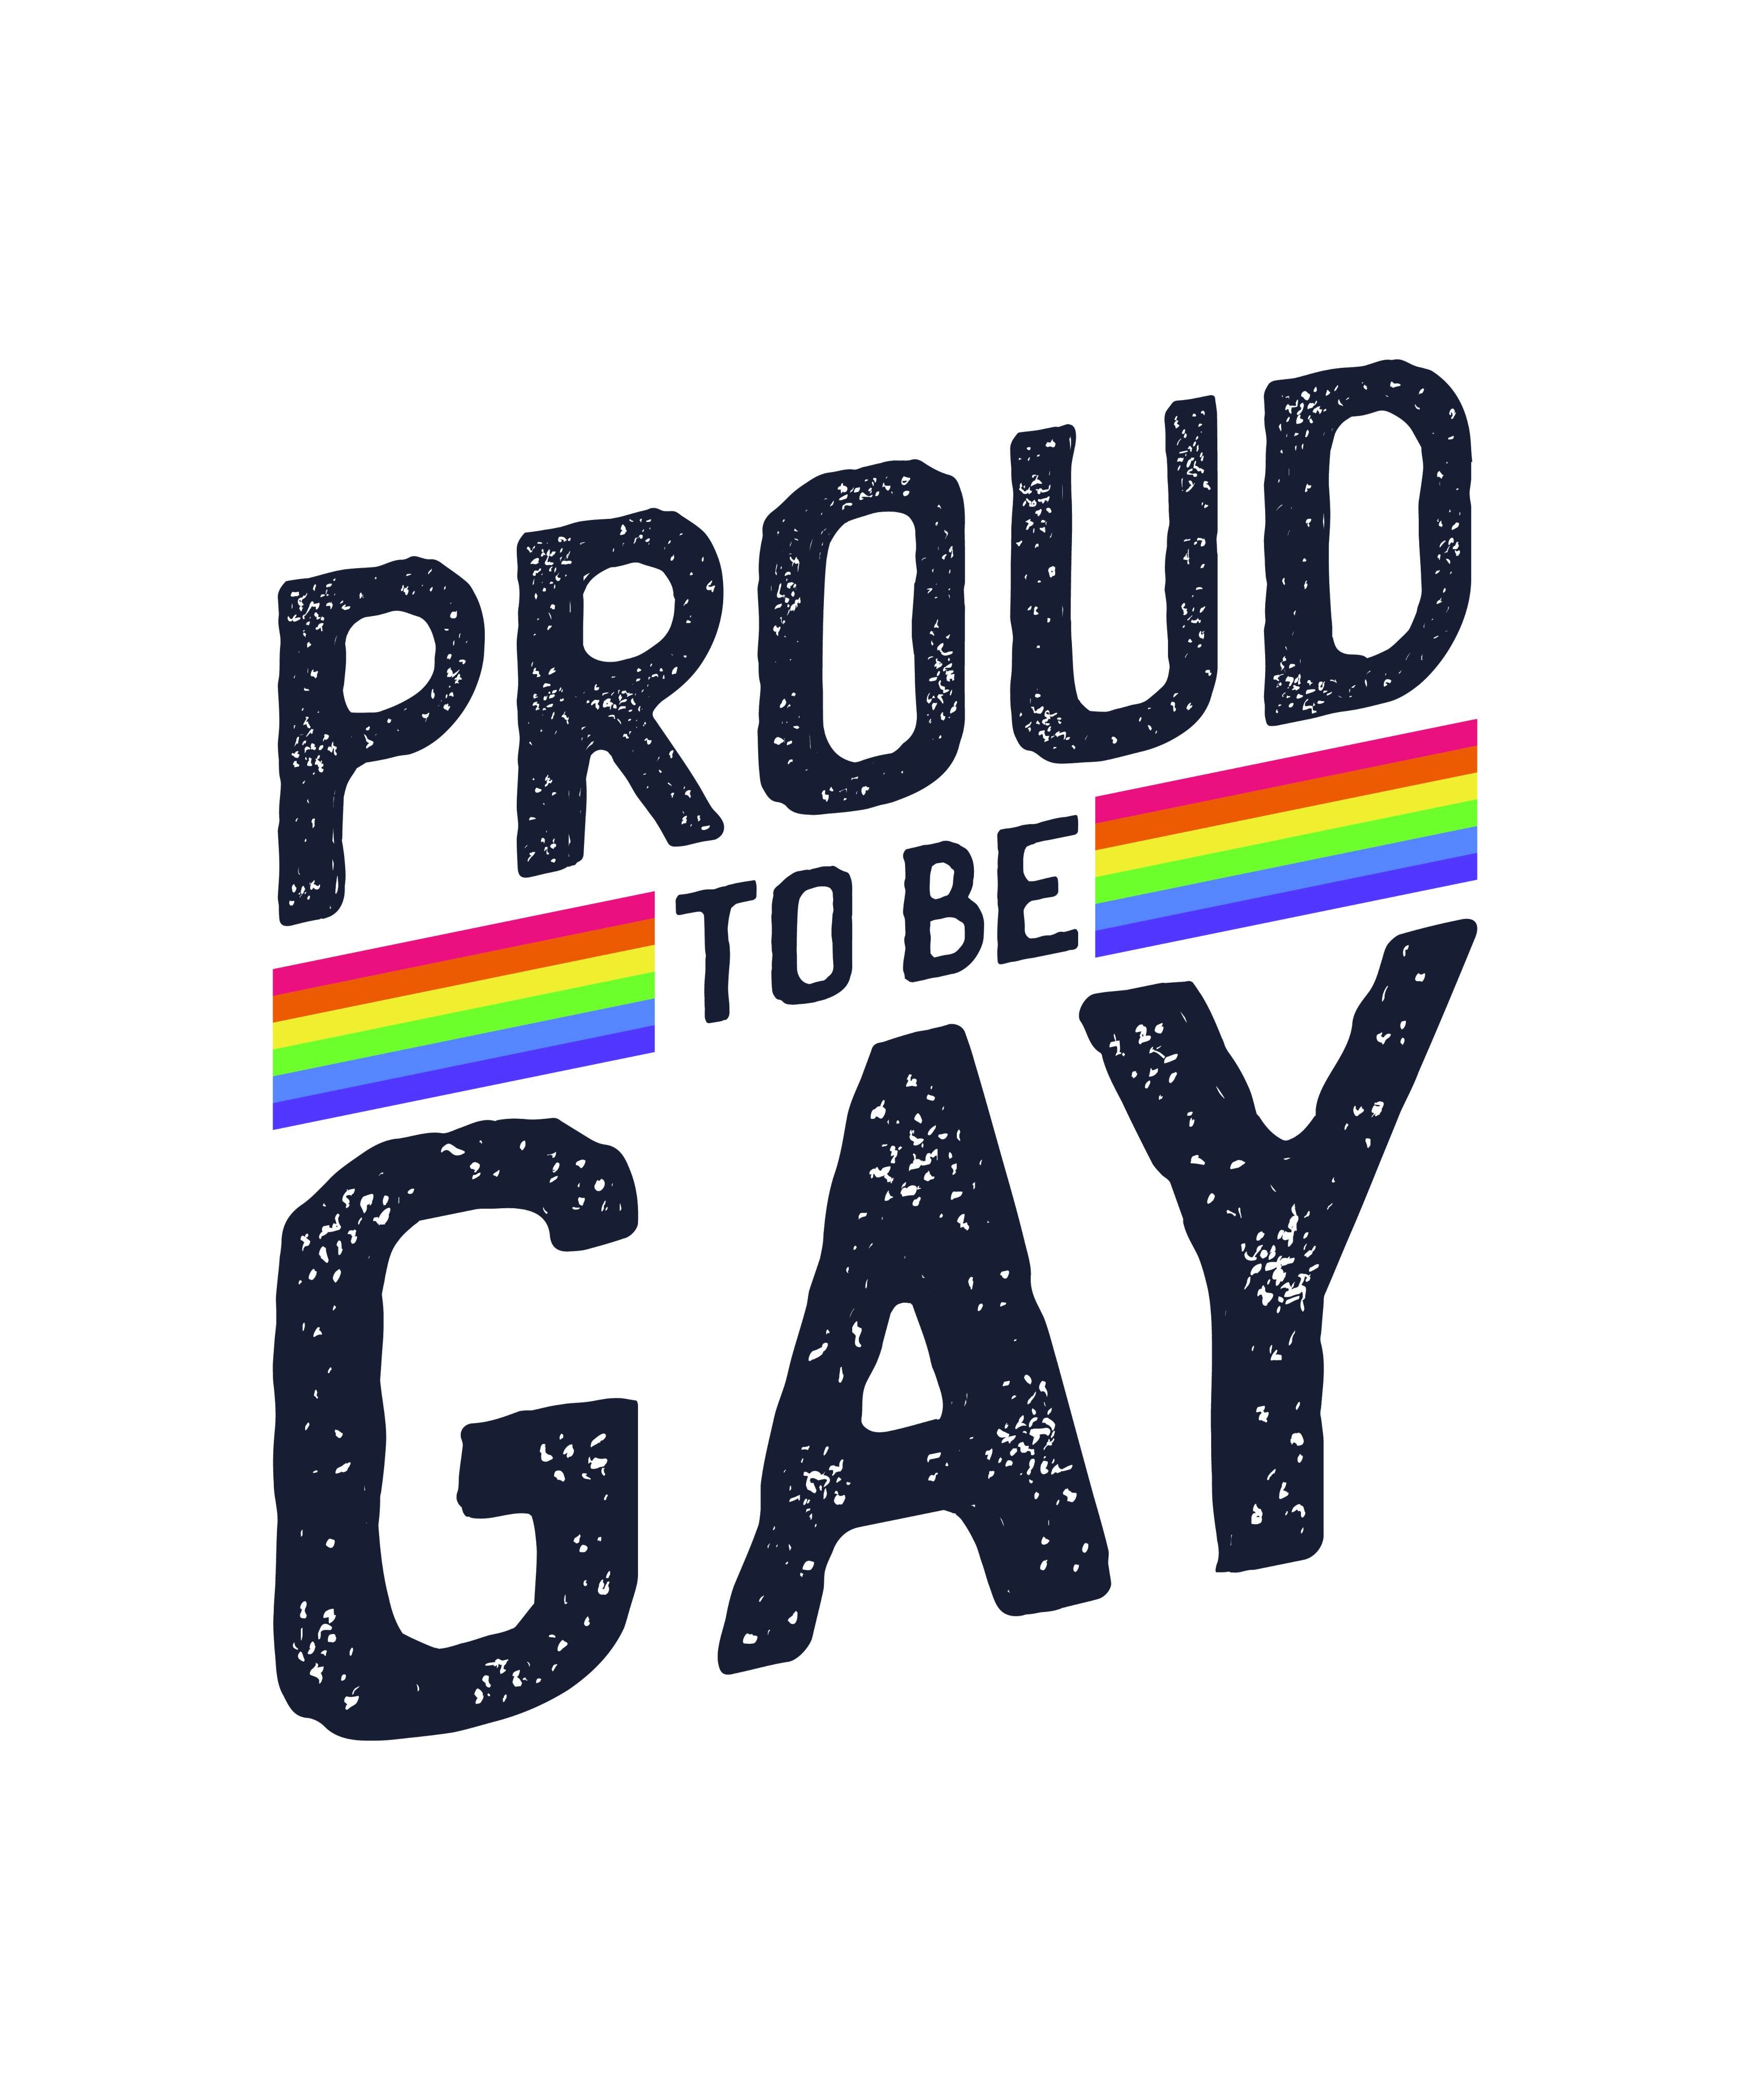 Proudly displaying true colors, this Proud to be Gay T-Shirt stands out on a white background.